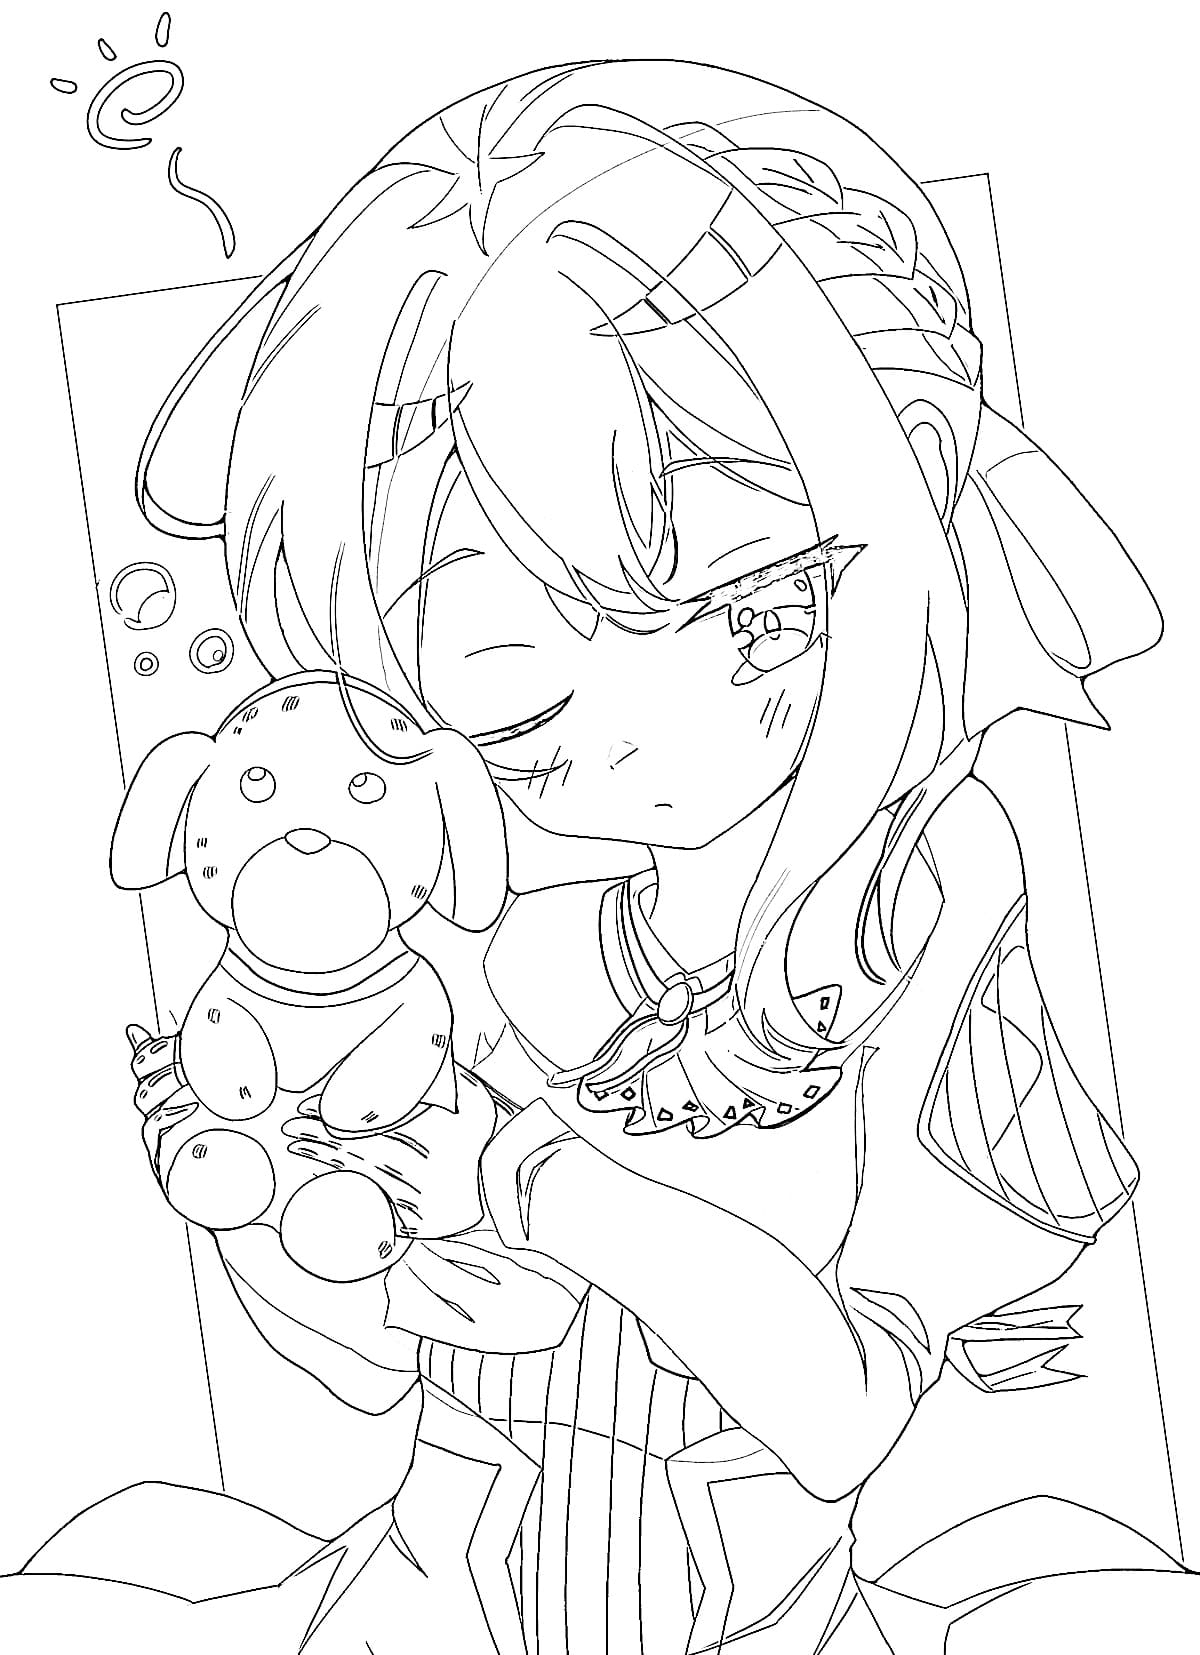 Coloring page Violet Evergarden Chibi